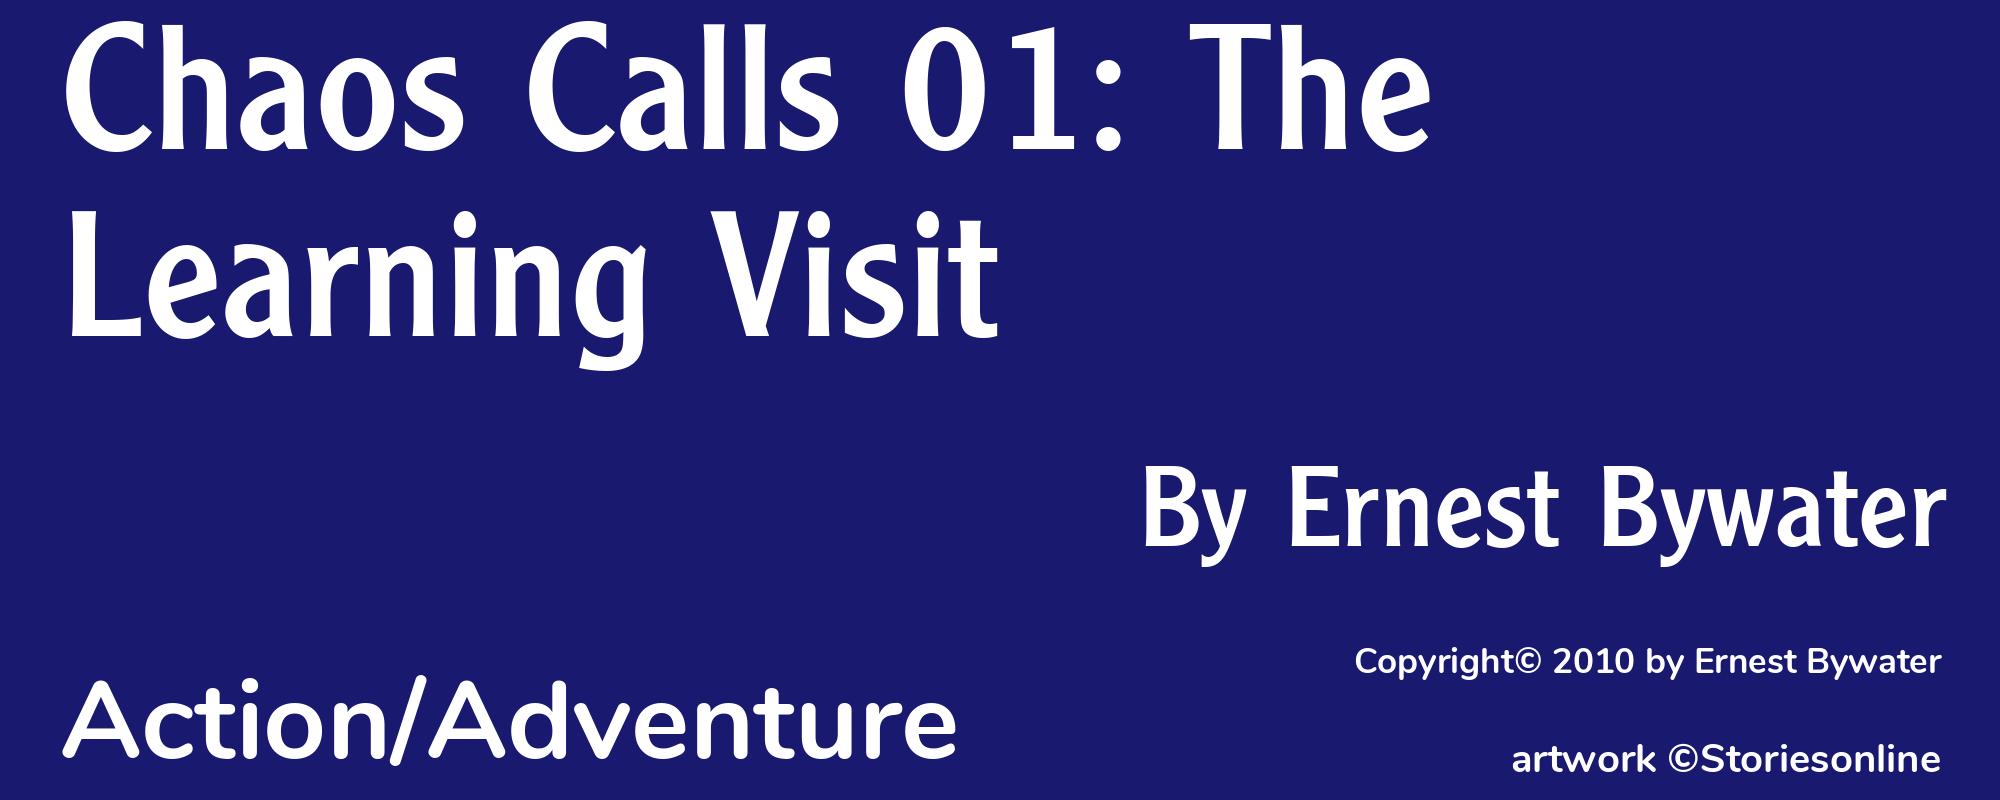 Chaos Calls 01: The Learning Visit - Cover